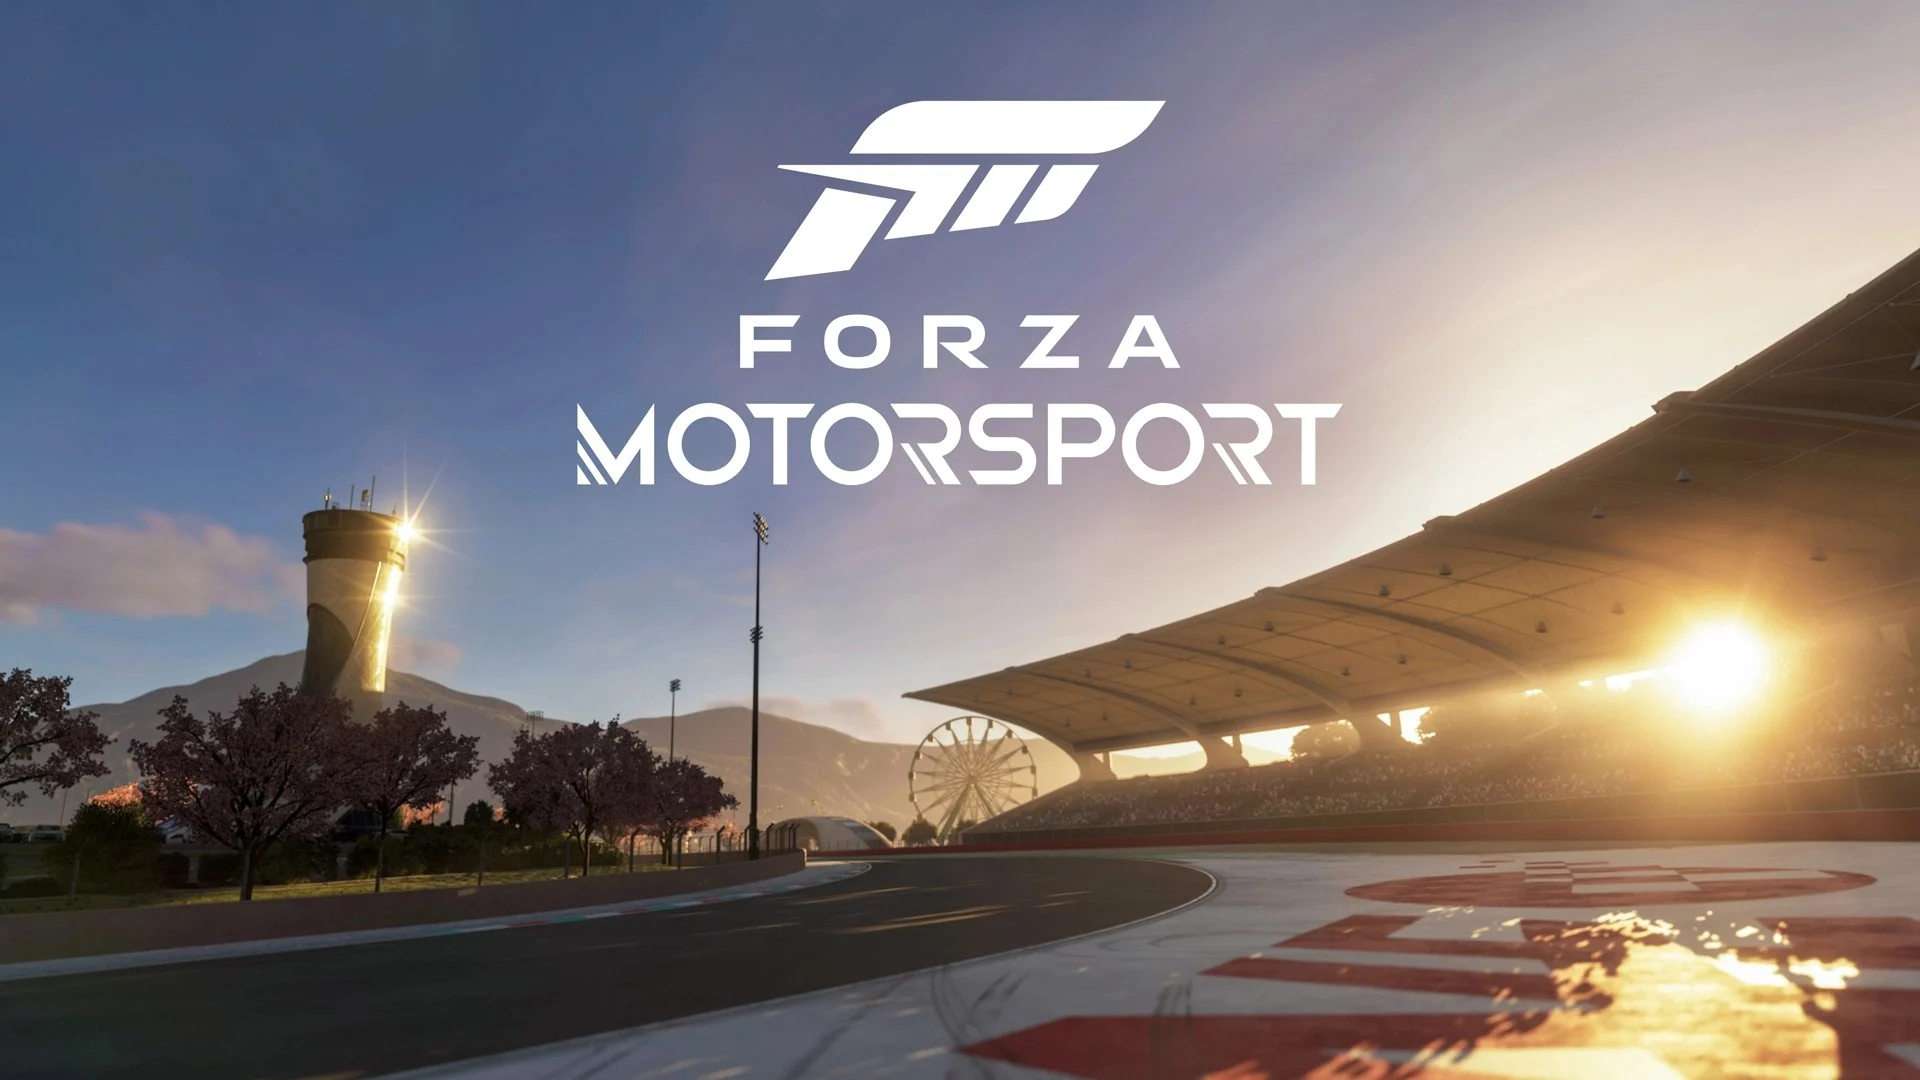 Forza Motorsport 8 is coming “later this year”. - Ranieri Gaming